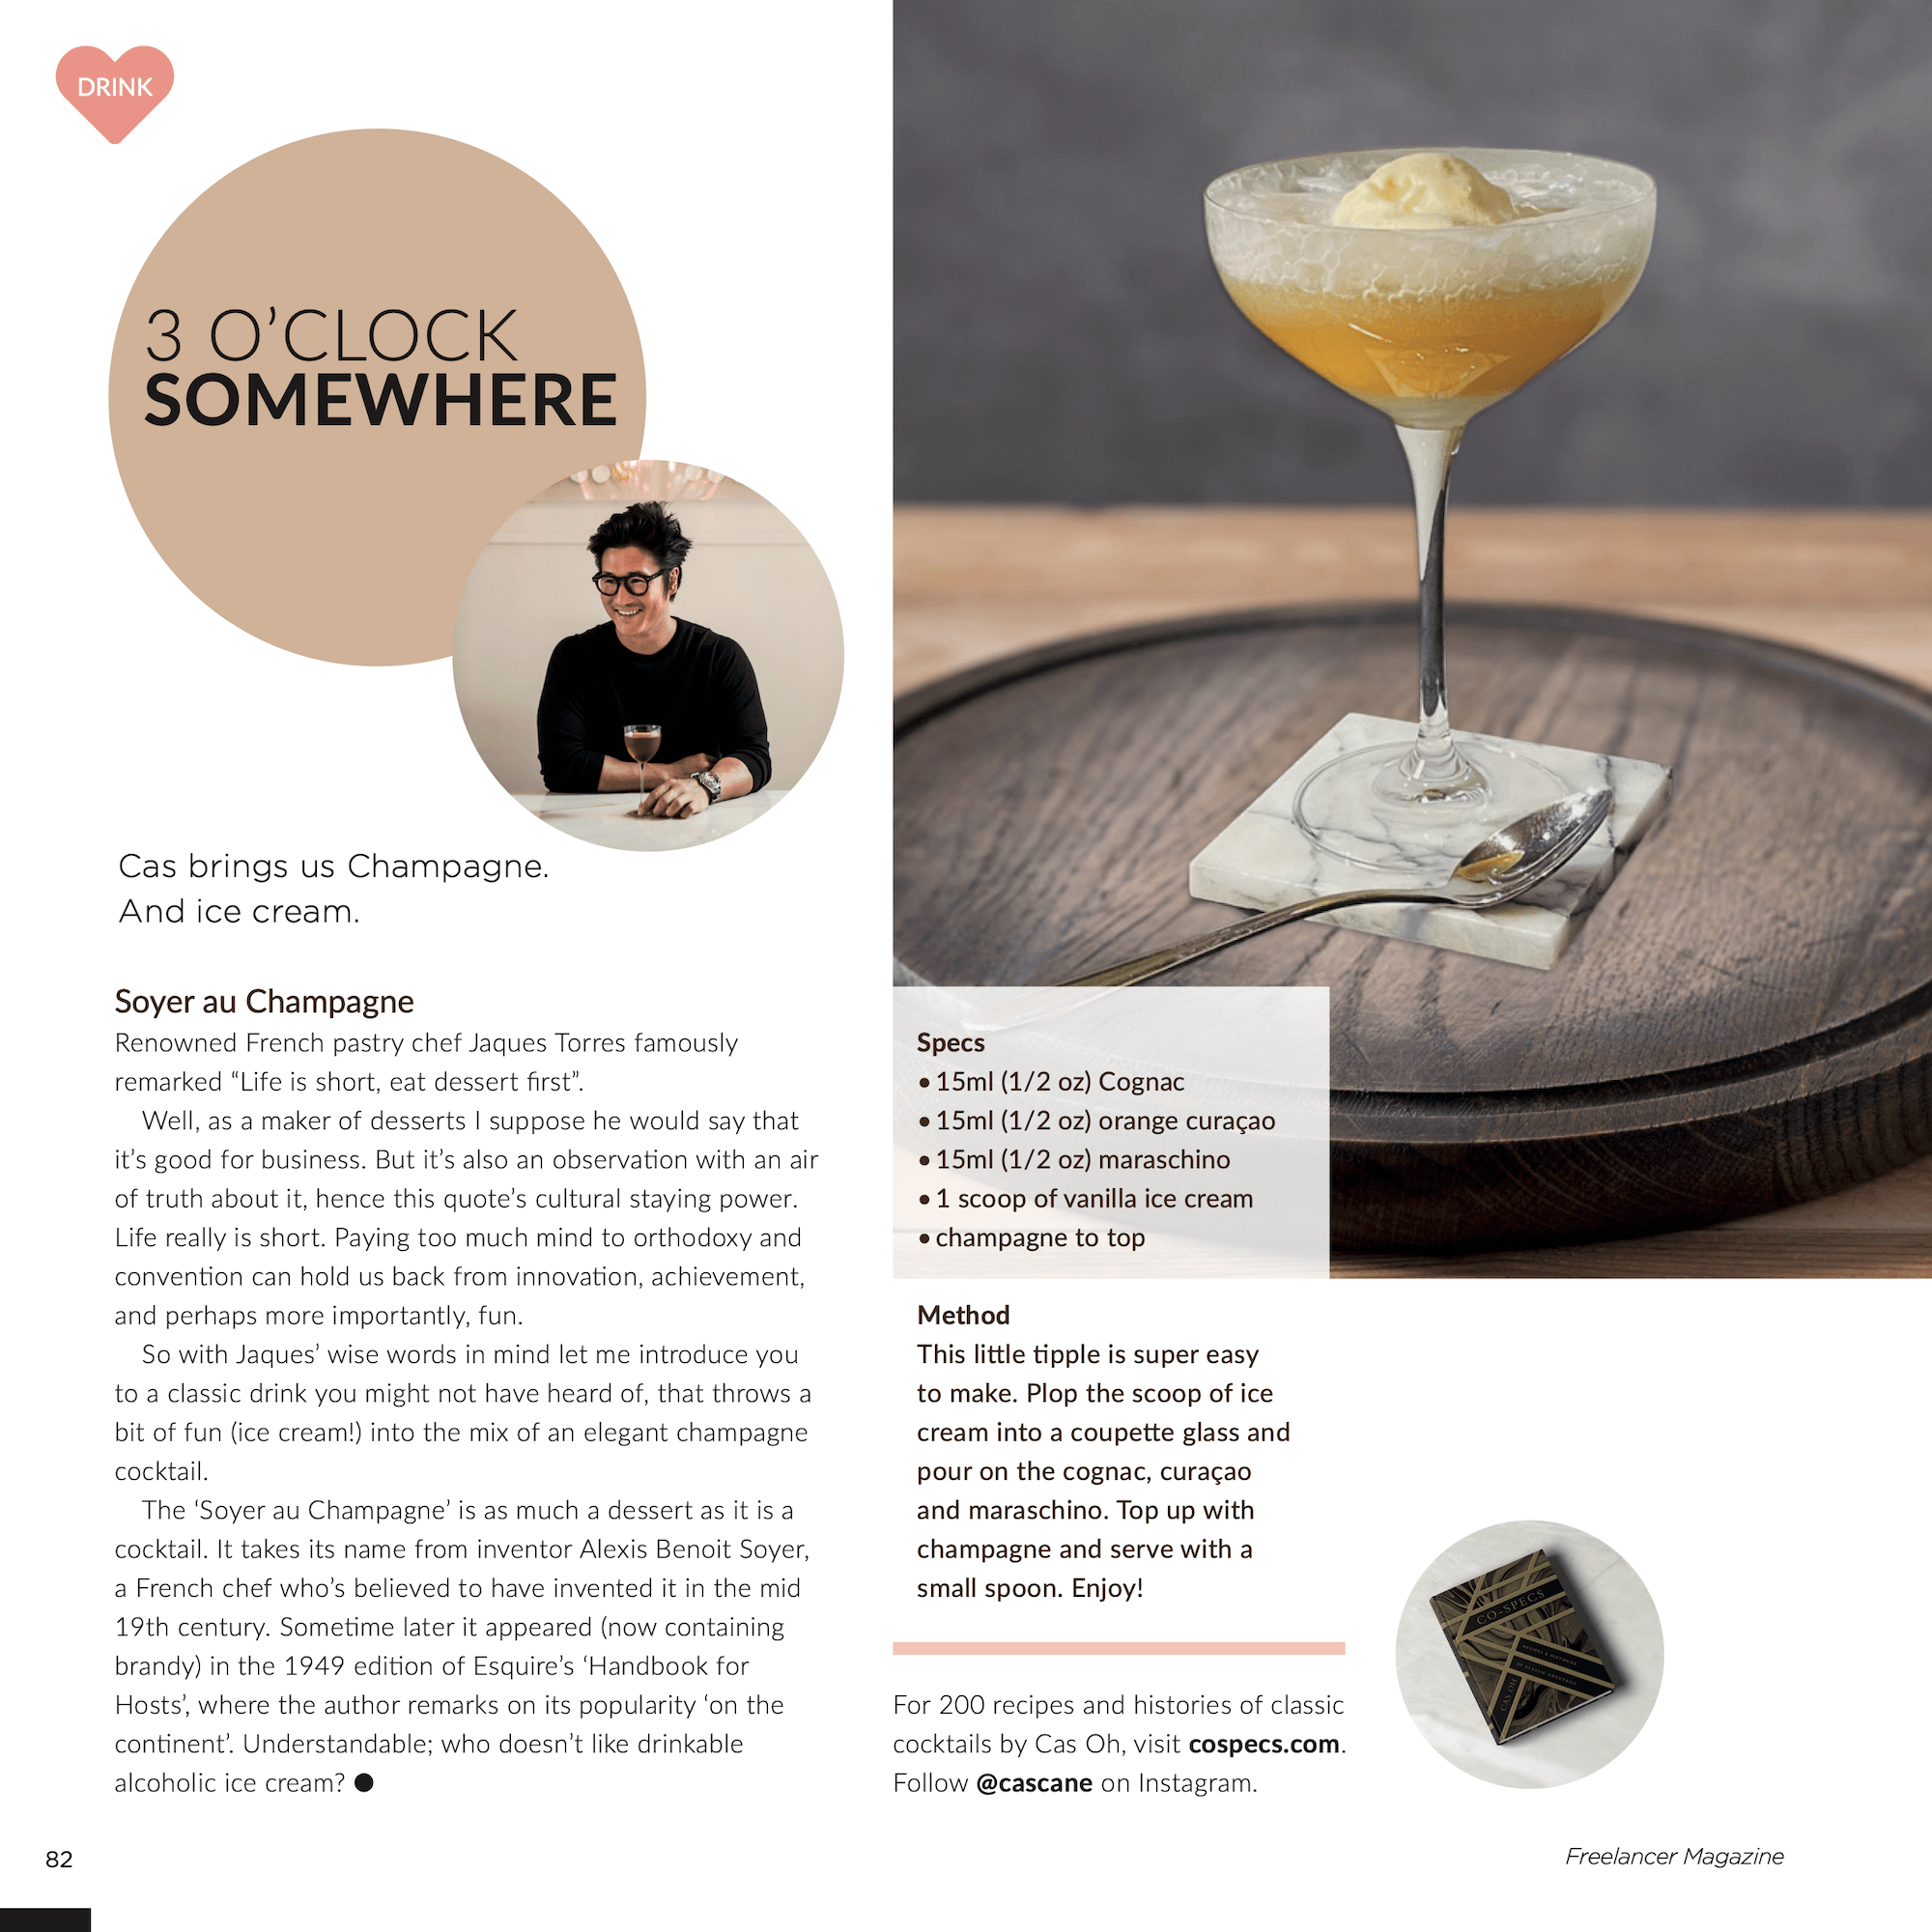 Freelancer Magazine Feb 2022 with Cas Oh, featuring the Soyer au Champagne cocktail